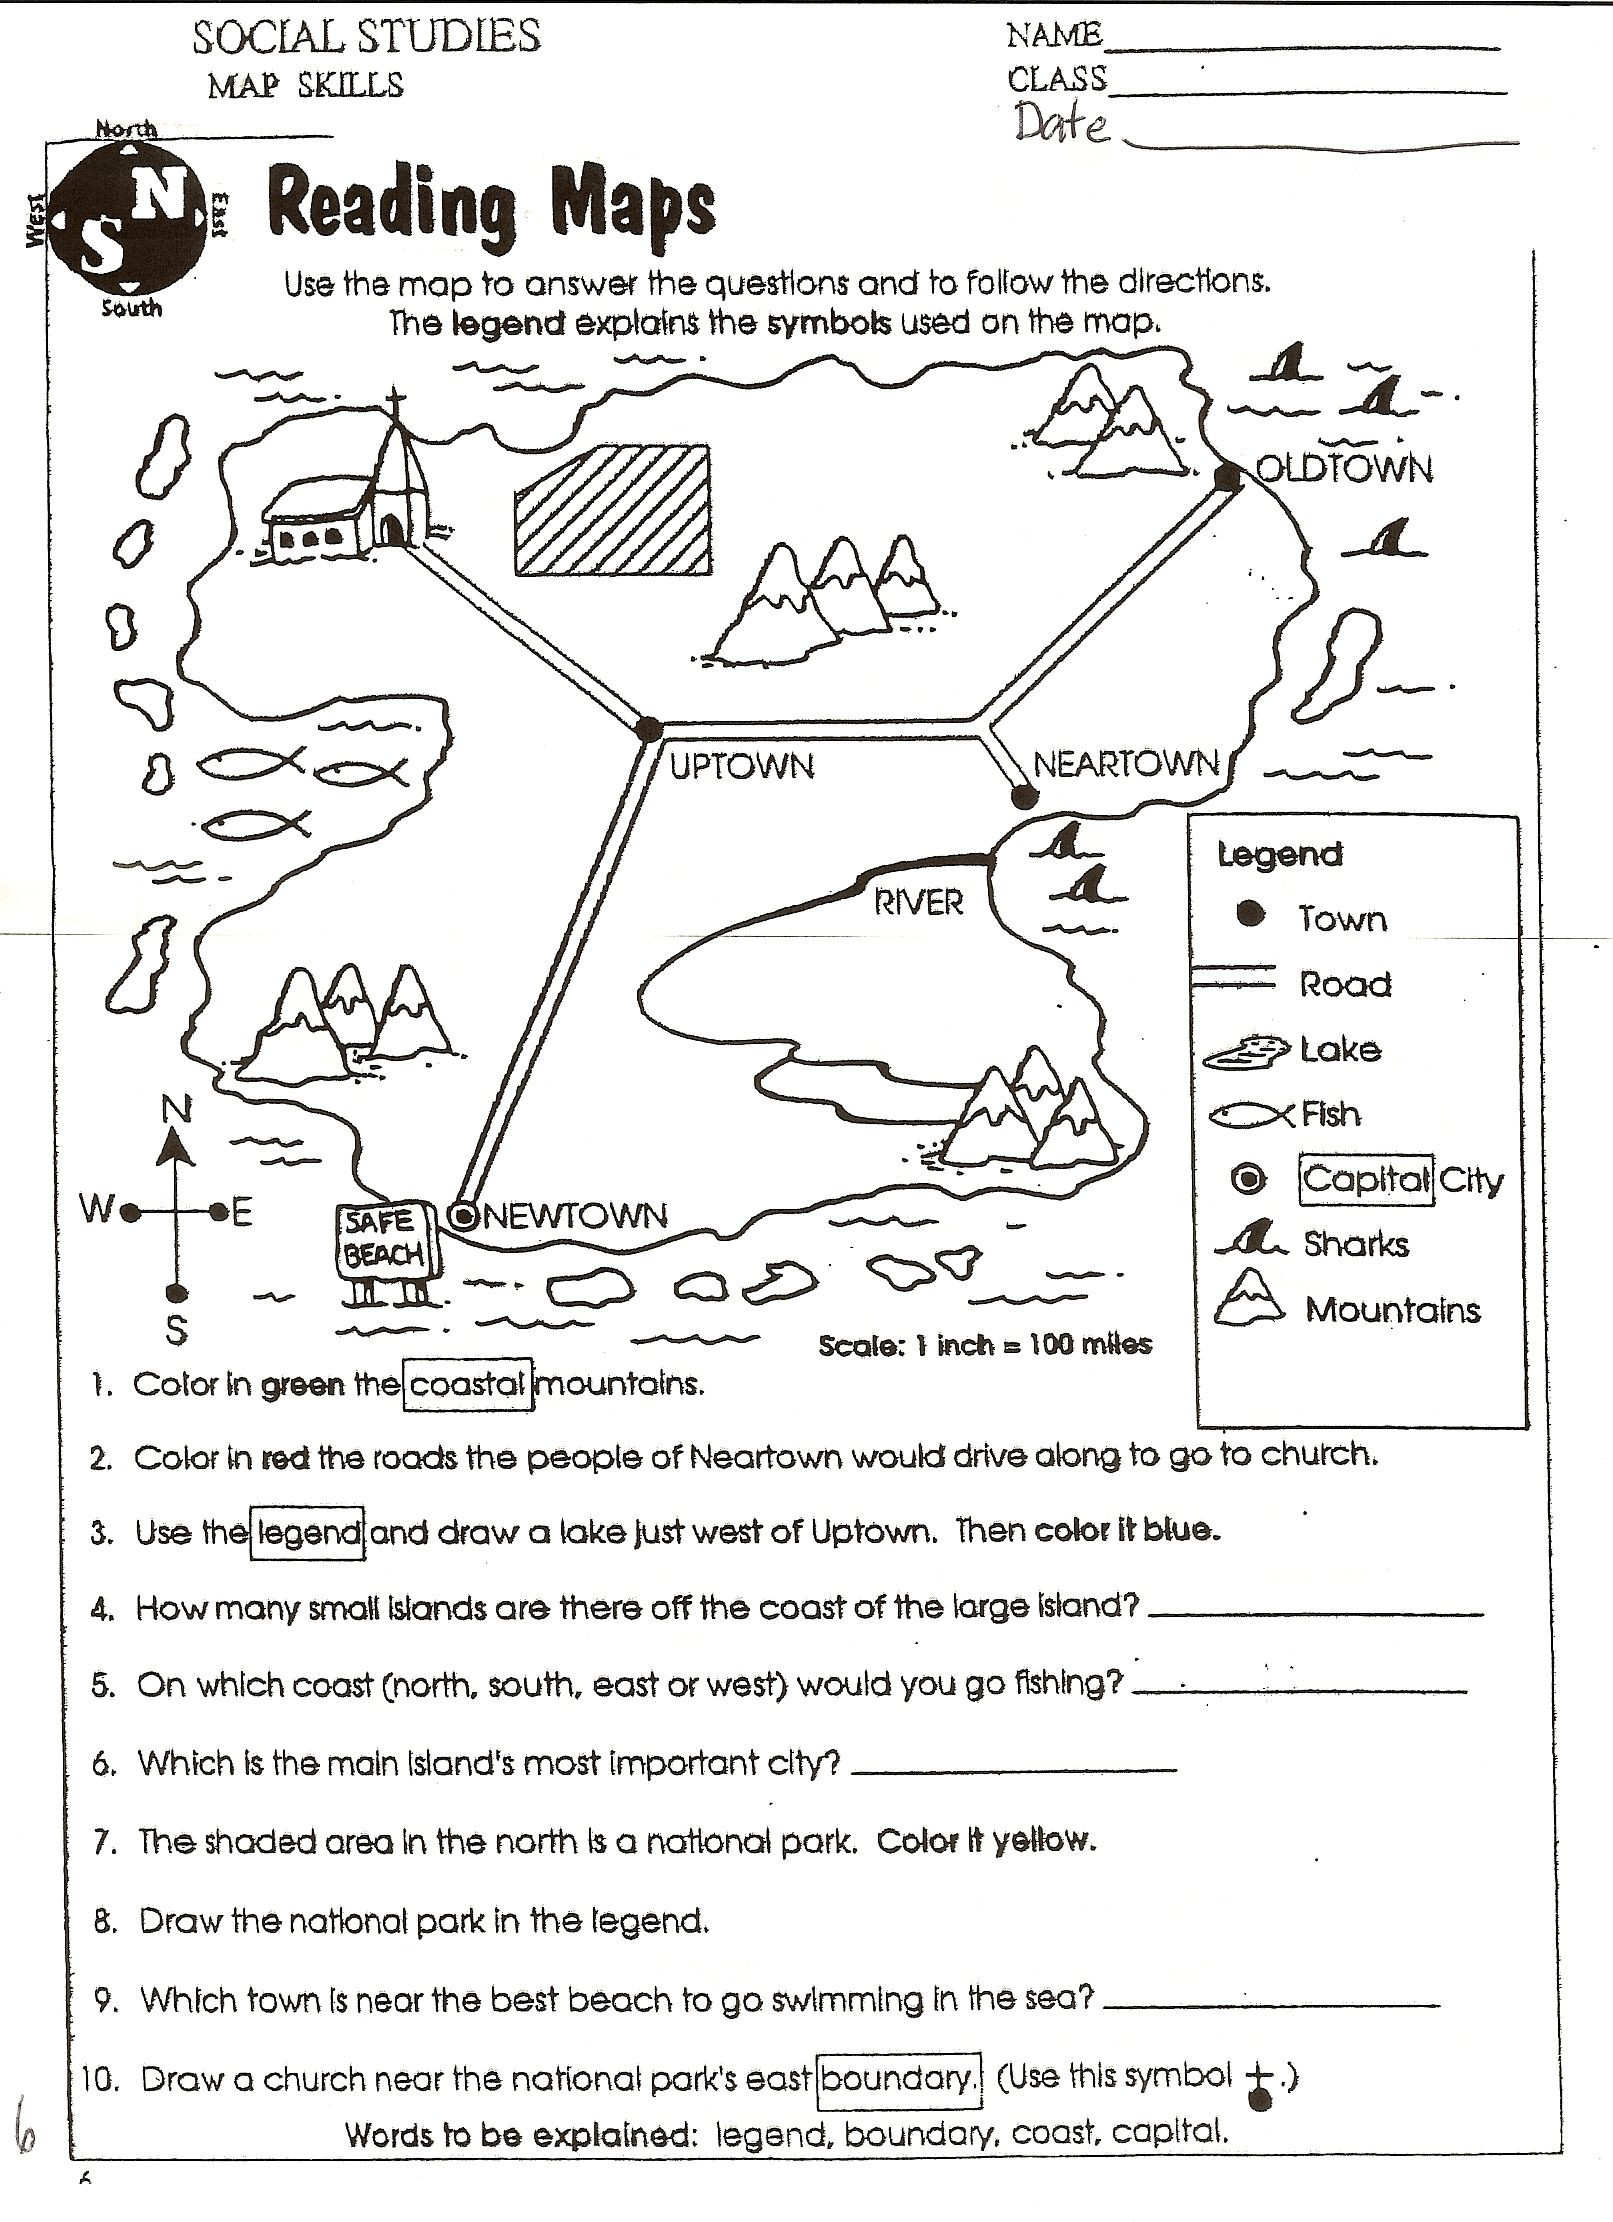 Printable Map Worksheets Unique Social Stu S Skills History Activities For Kids